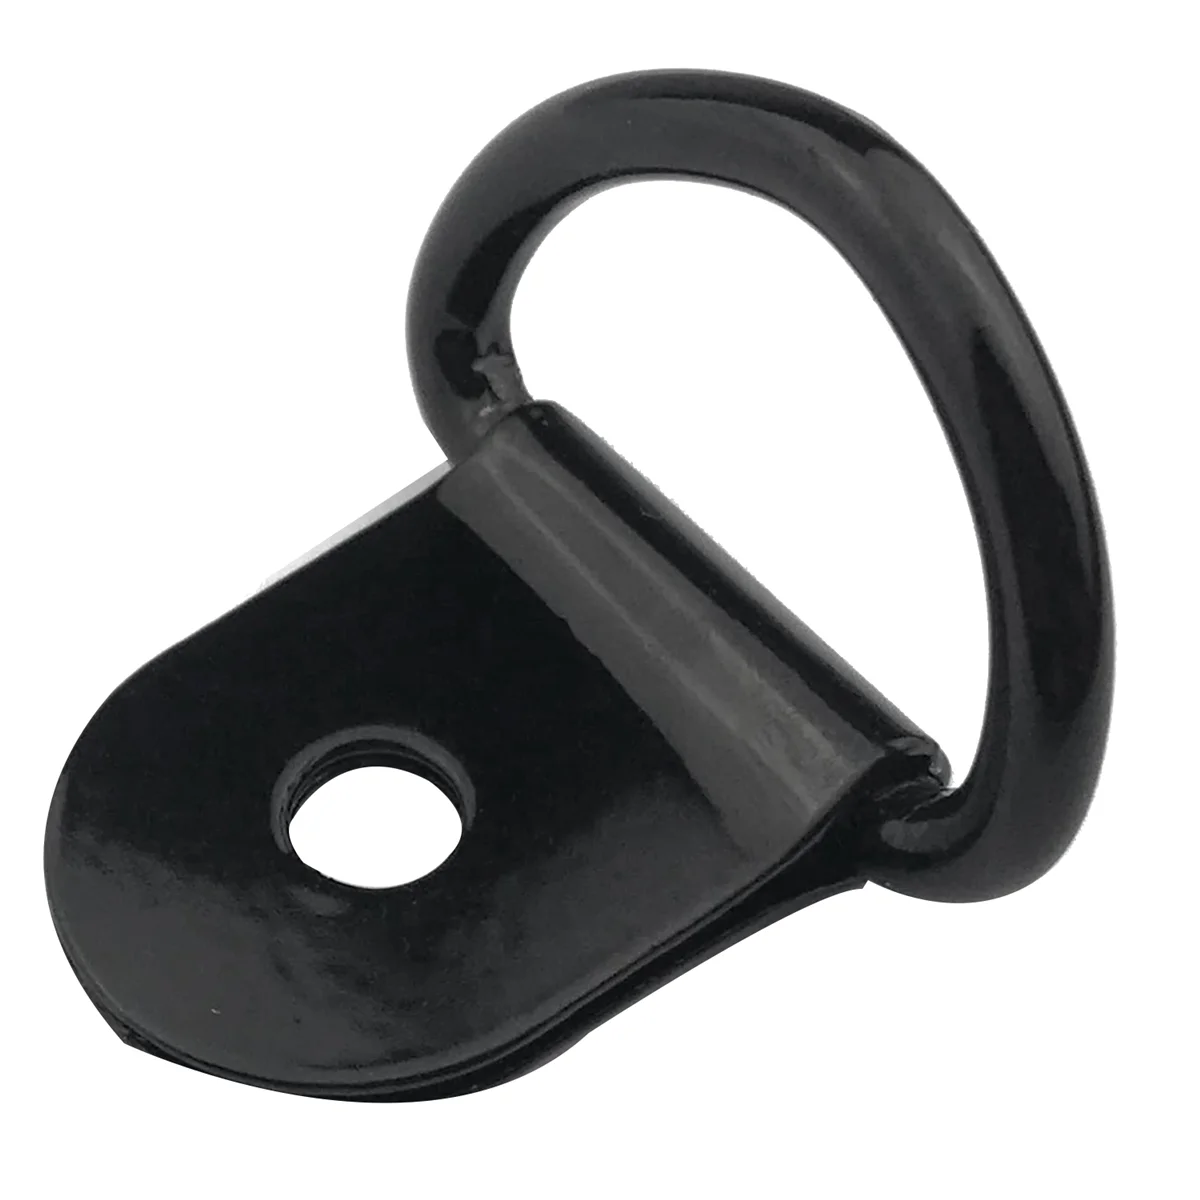 

30 PCS Small Steel D-Ring Tie Downs, D Rings Anchor Lashing Ring for Loads on Case Truck Cargo Trailers RV Boats, Black